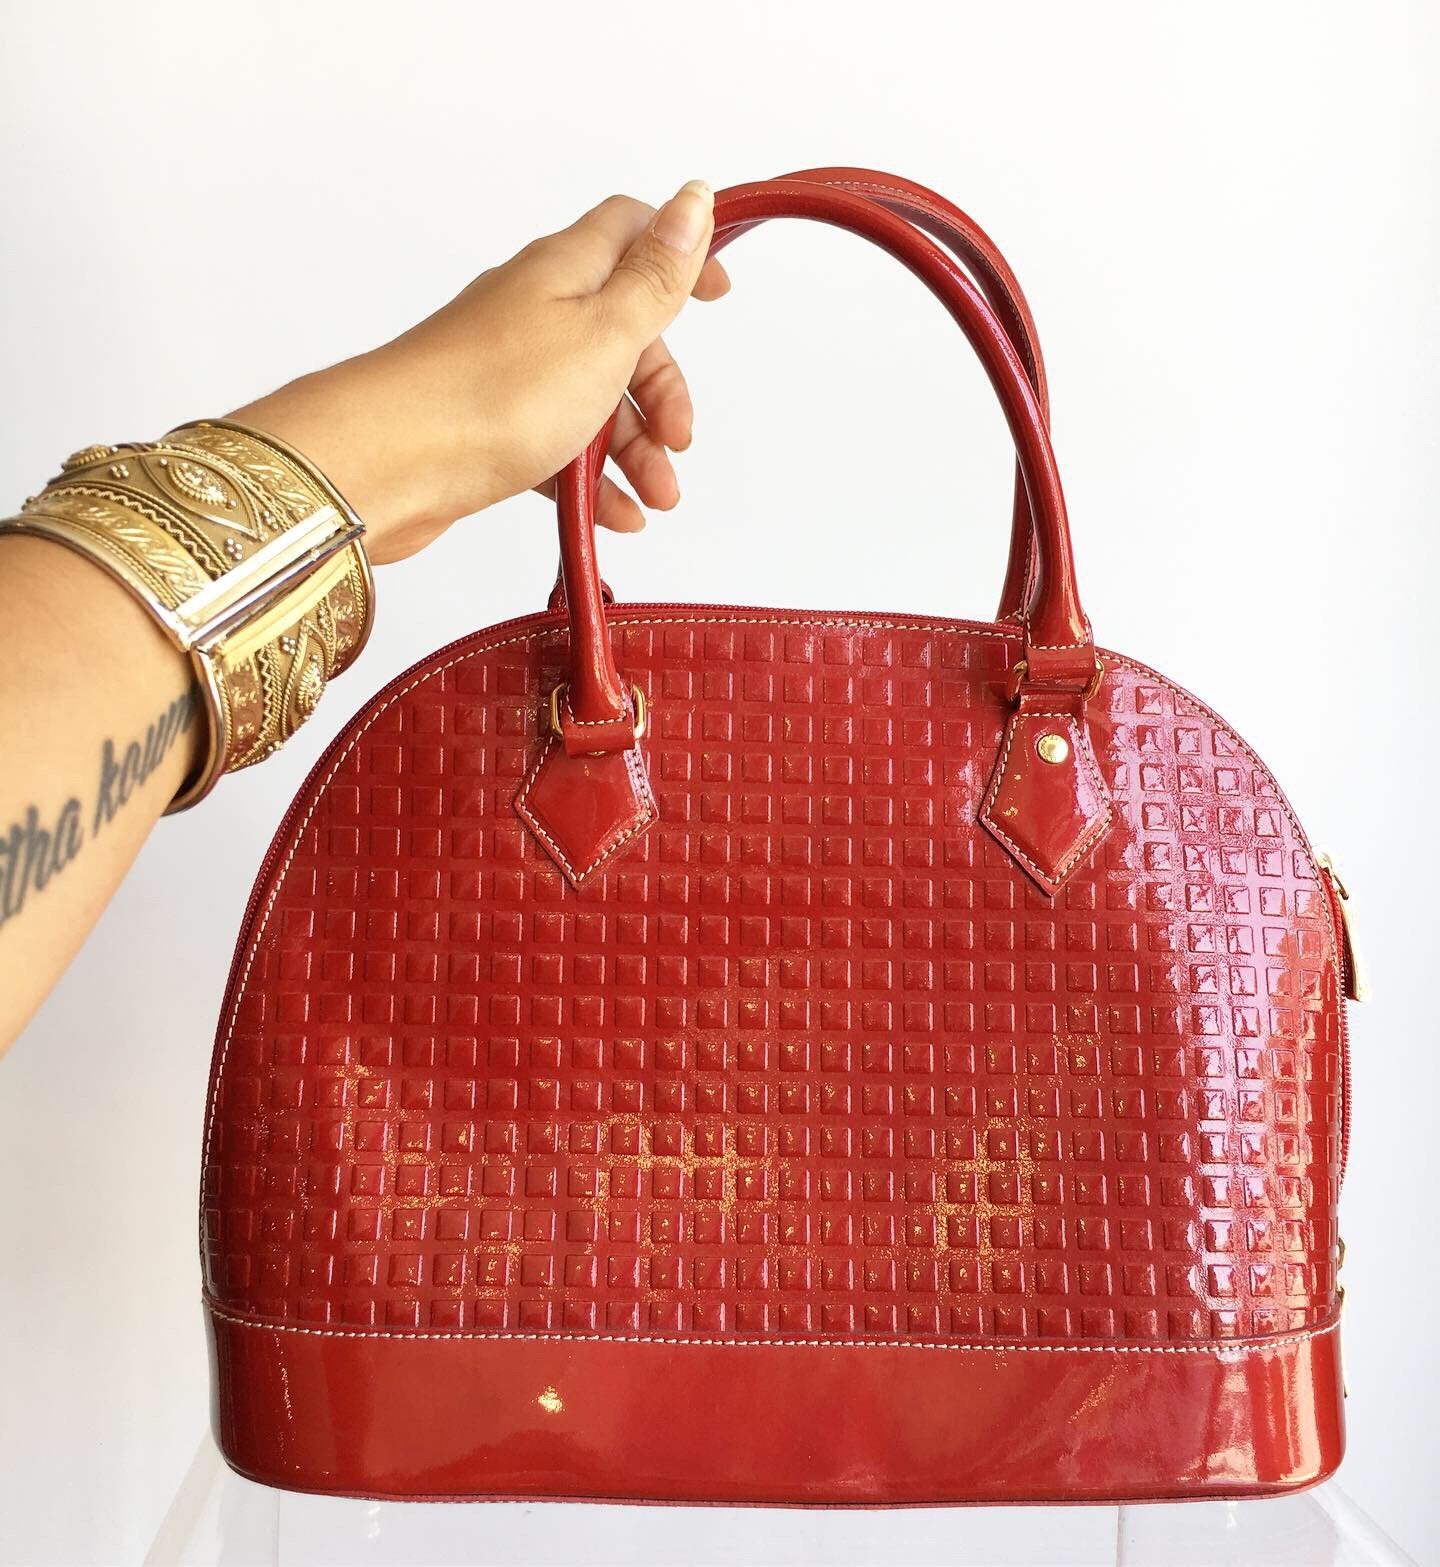 Arcadia Patent Leather Handbag Purse | Cherry Red | Laura Small Style – Monarch Thrift Shop